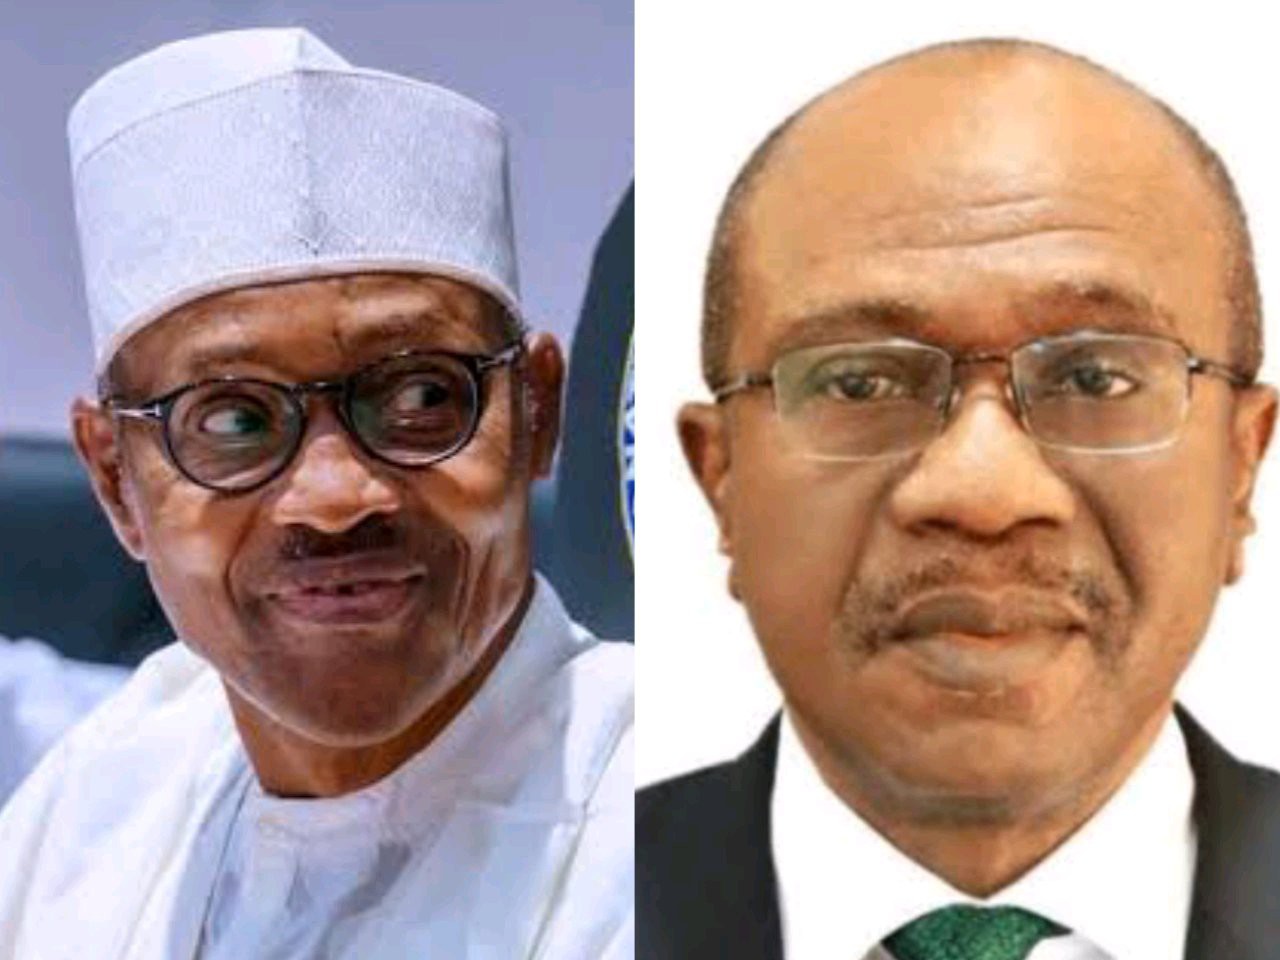 According to Clark, When Emefiele Took The New Notes To Buhari, It Was Buhari Who Said He Should Use Local Printer